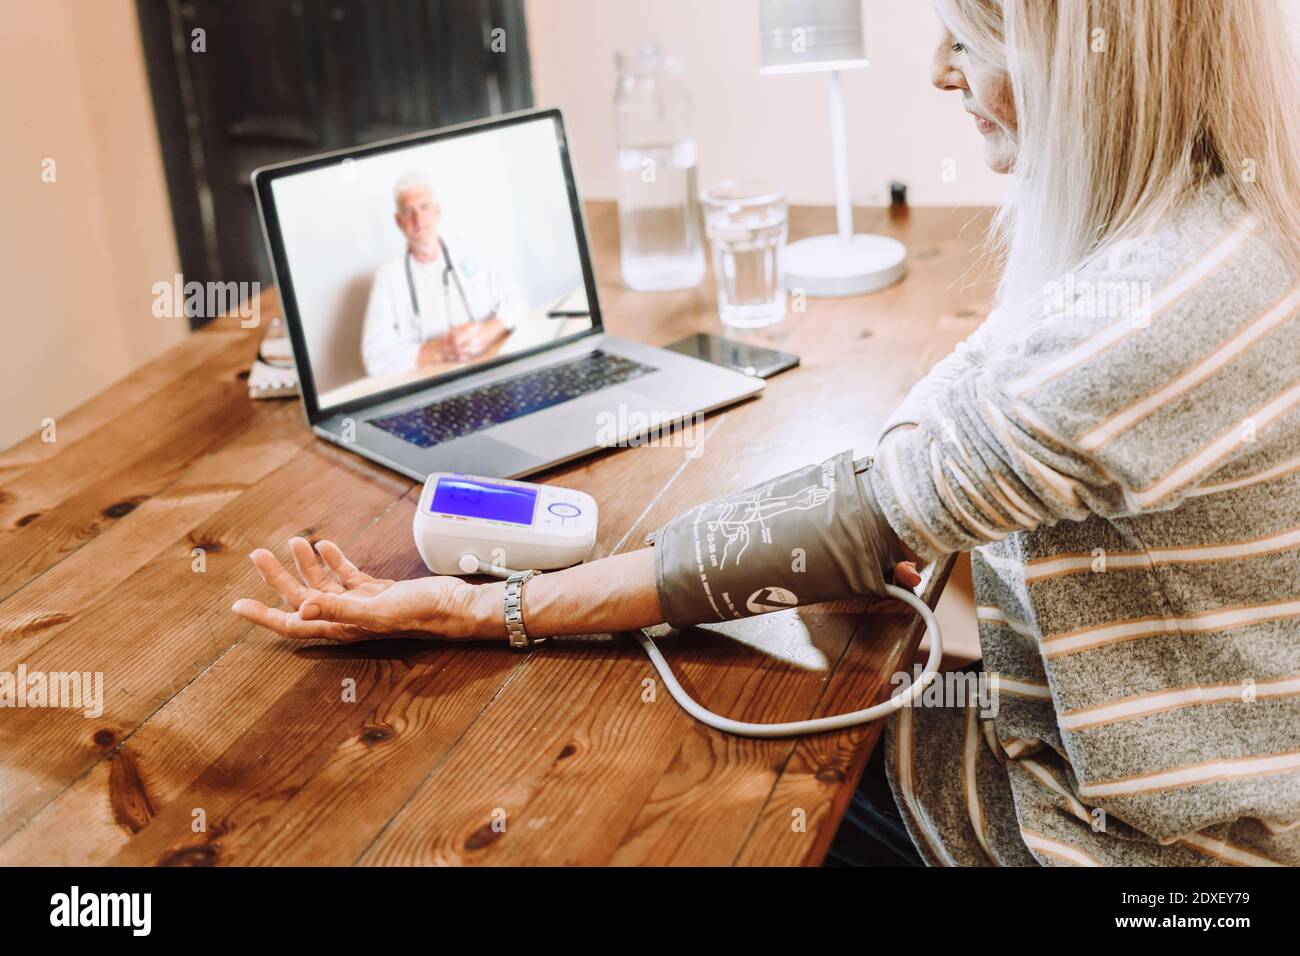 Senior woman checking own blood pressure under guidance of doctor on video call at home Stock Photo